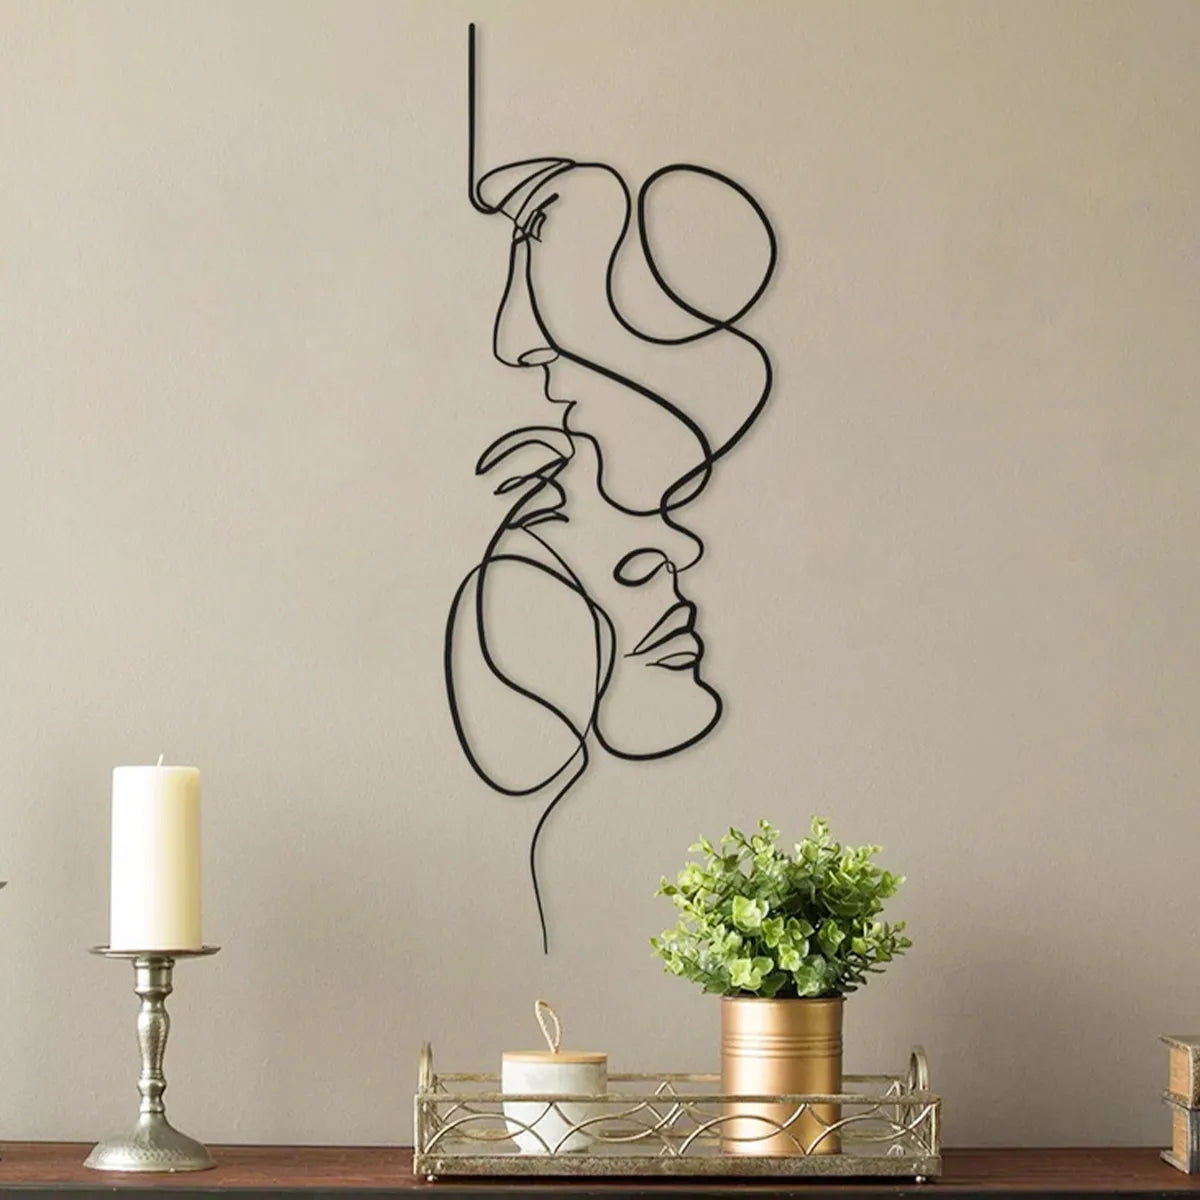 Black Metal Wall Art Wall Hanging Decor Abstract Iron Wall Sculpture Minimalist Facial Line Home Decoration Crafts